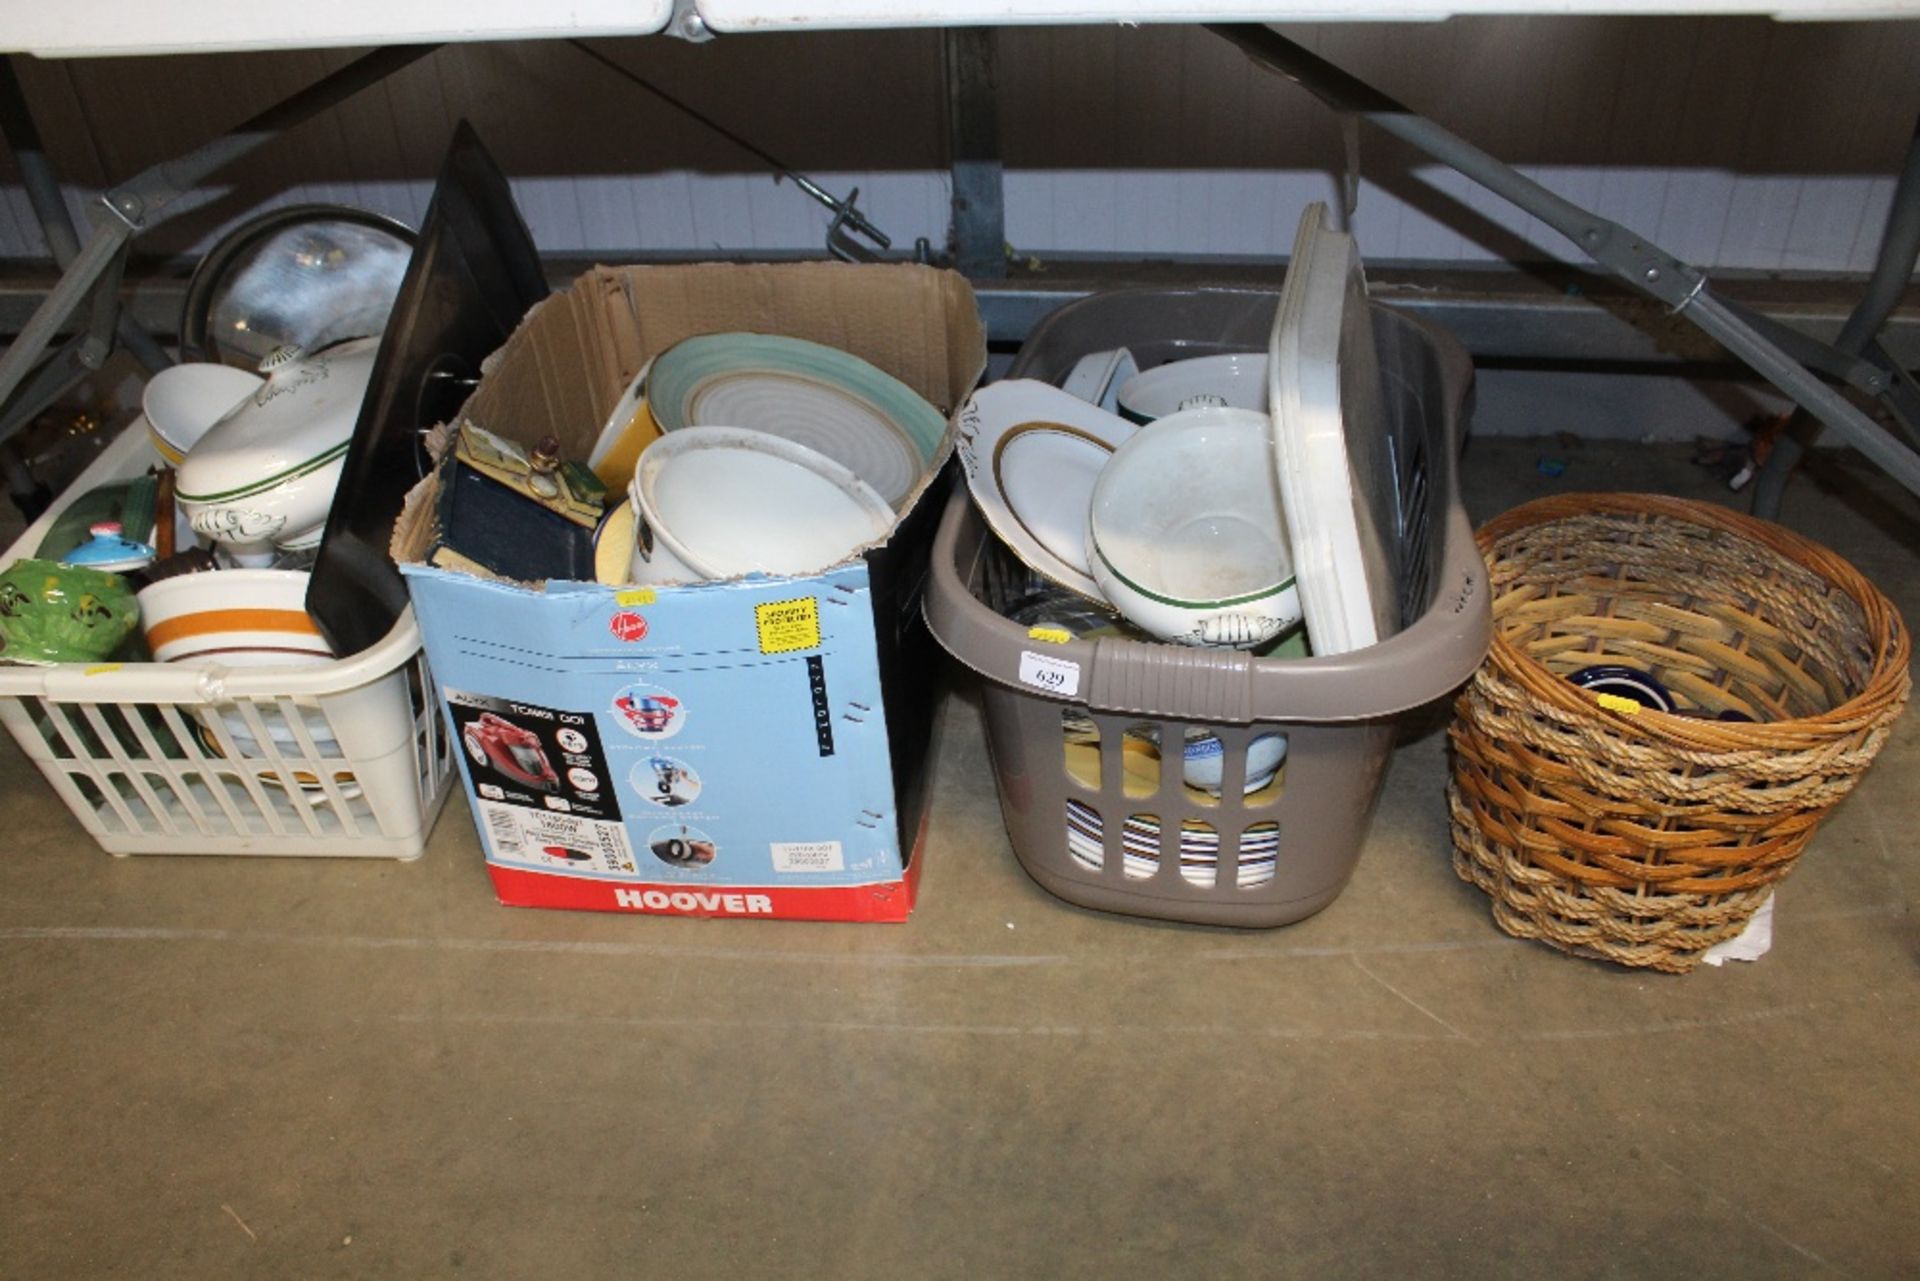 Three boxes and a wicker basket containing various